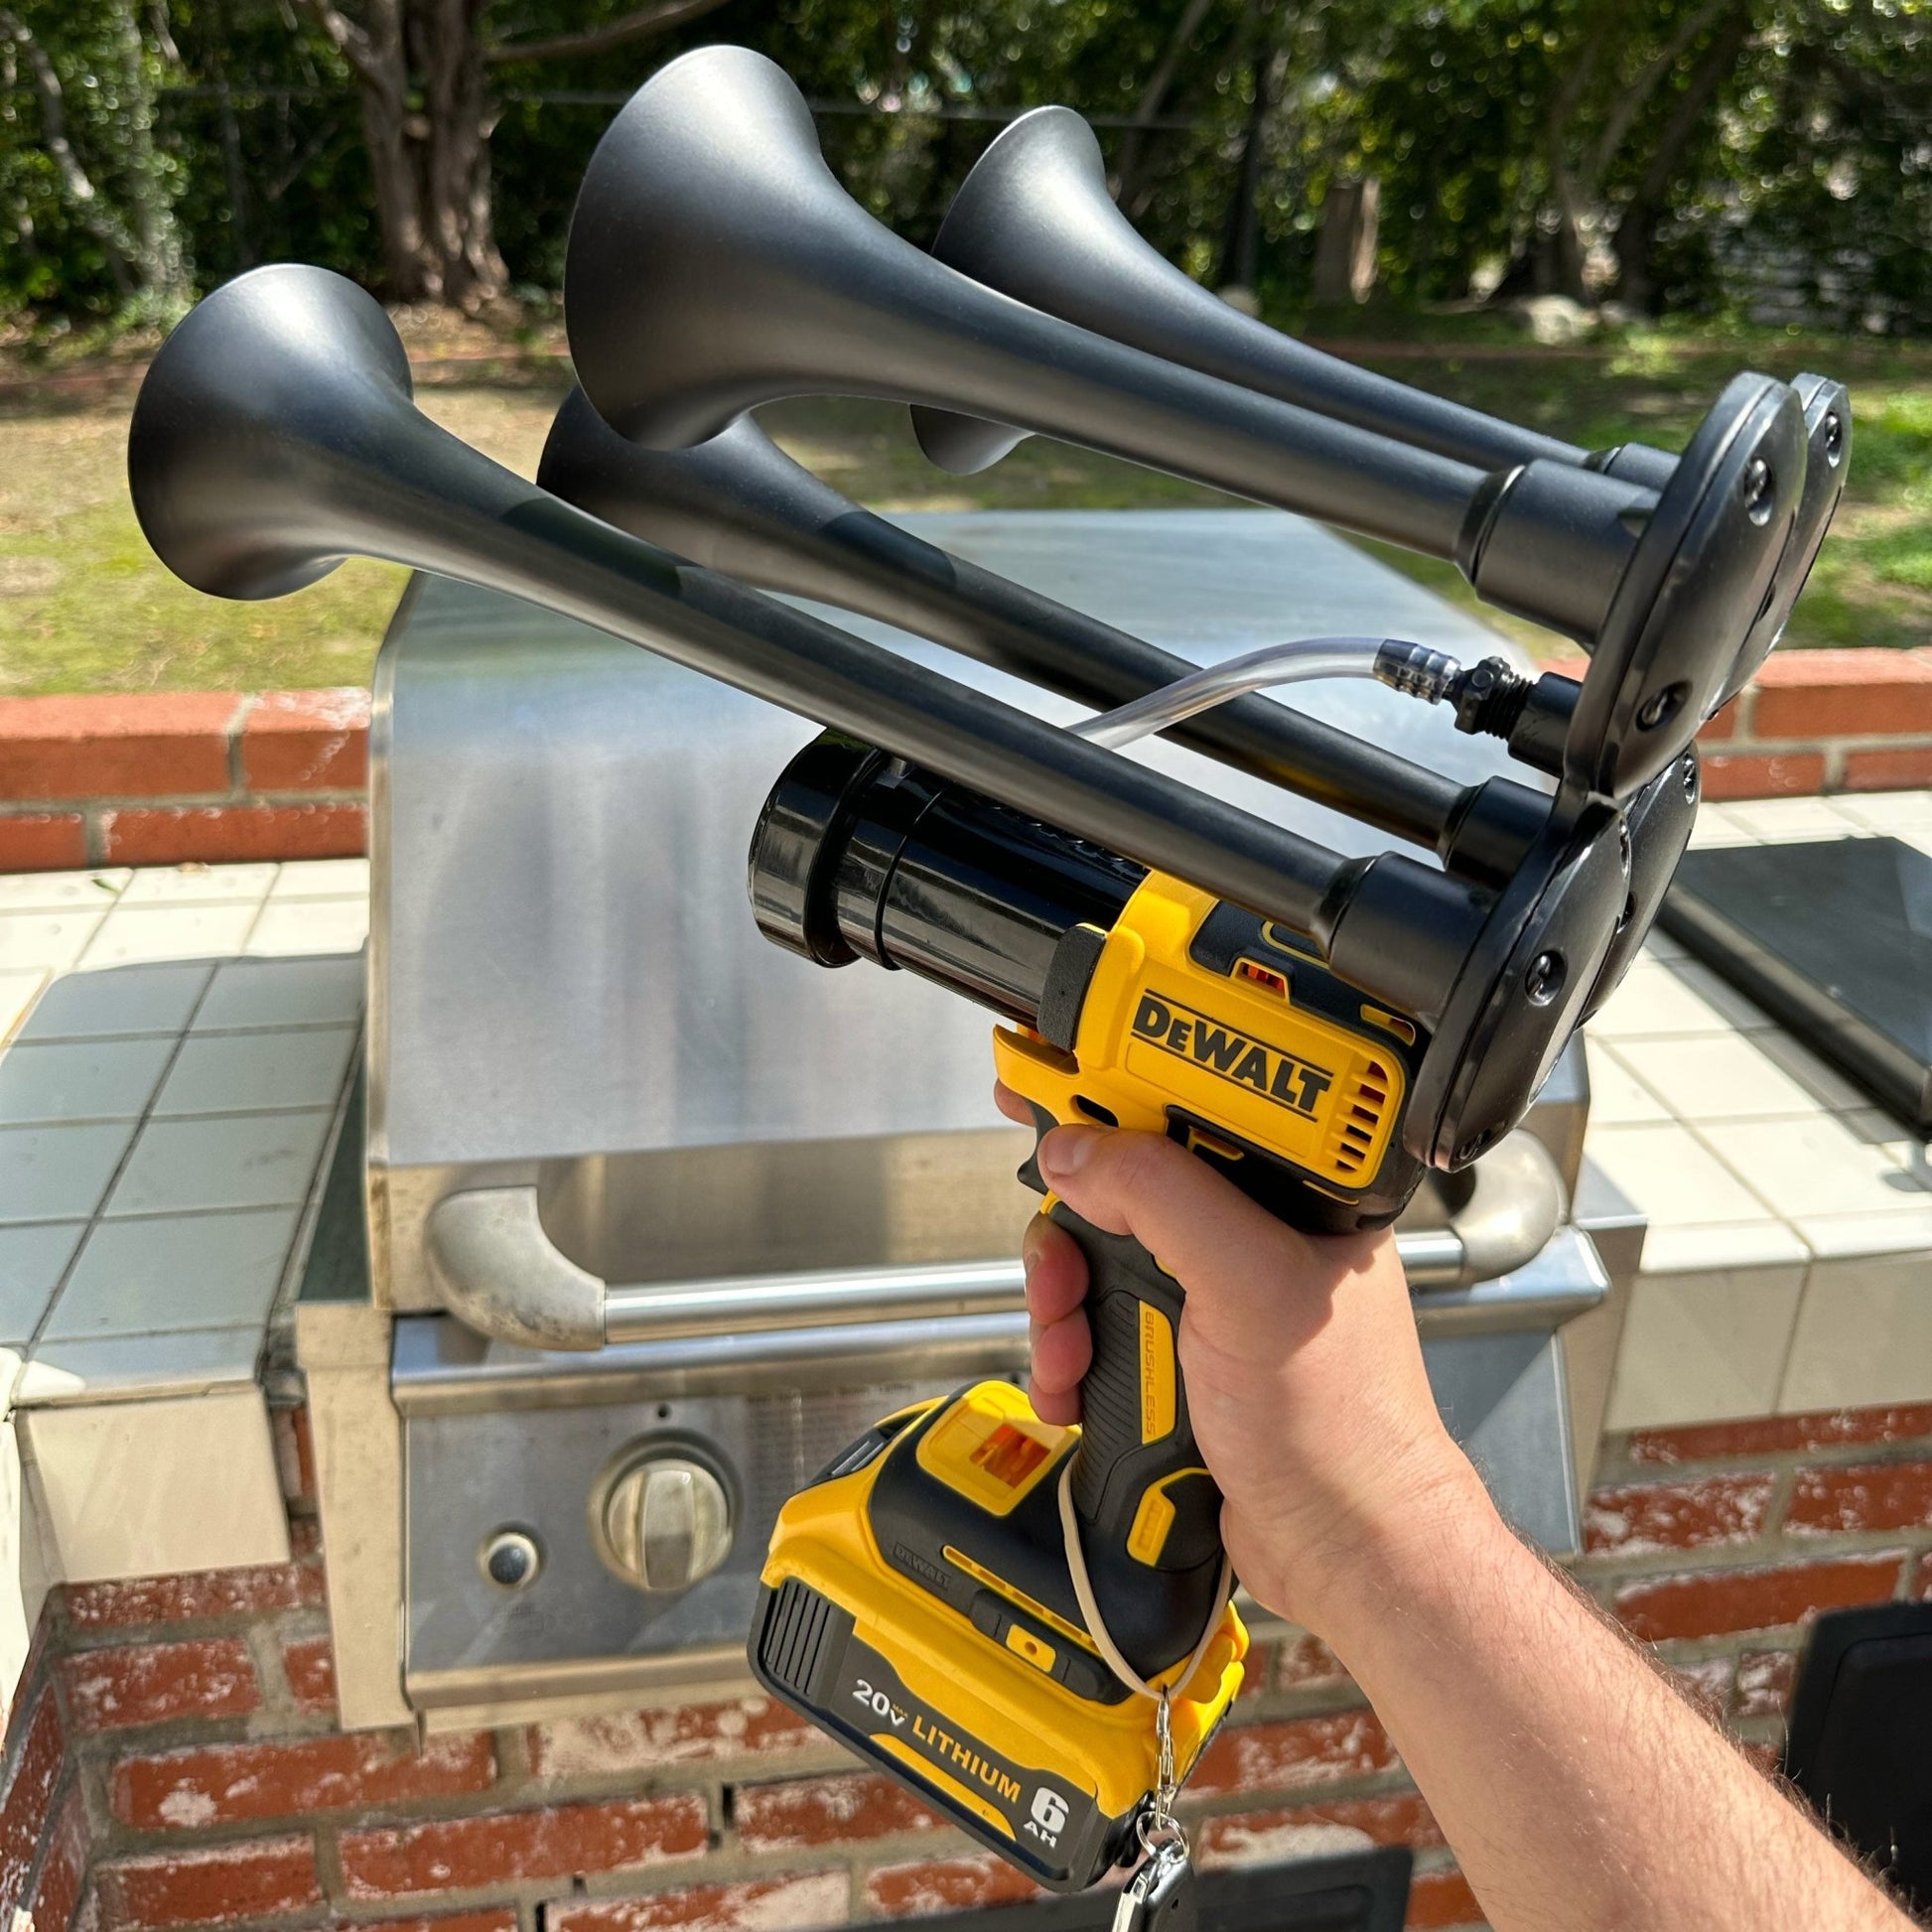 DeWalt Impact Drill Train Horn 20v with Remote Control - BossHorn: Made in  USA